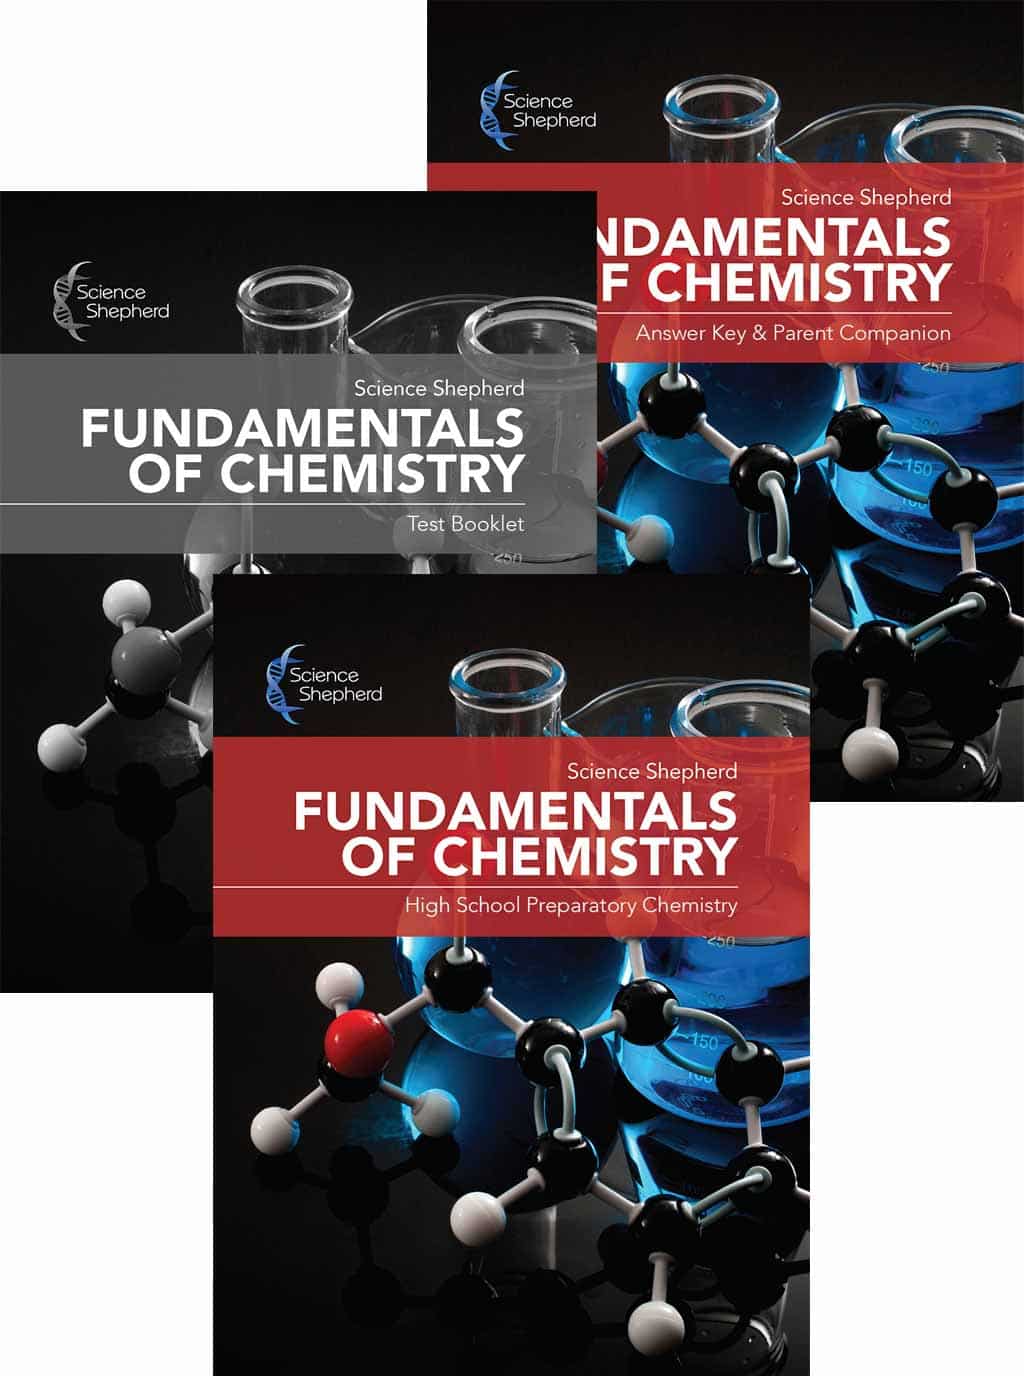 Fundamentals of Chemistry homeschool curriculum 3-book set with textbook, parent guide and tests